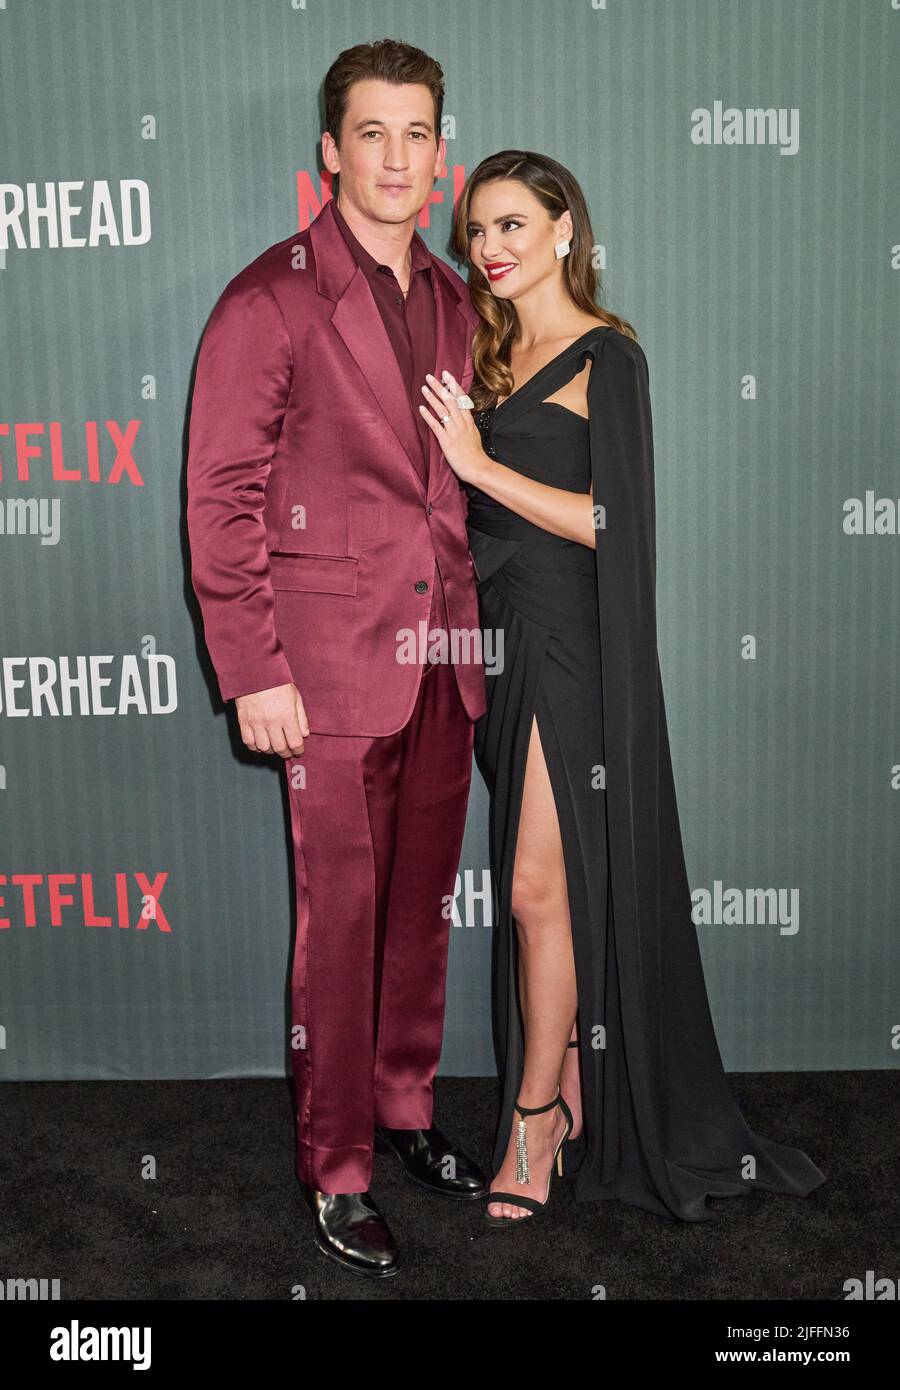 NEW YORK, NY, USA - JUNE 15, 2022: Miles Teller and Keleigh Sperry attend the New York Premiere of Netflix's 'Spiderhead' at the Paris Theater. Stock Photo